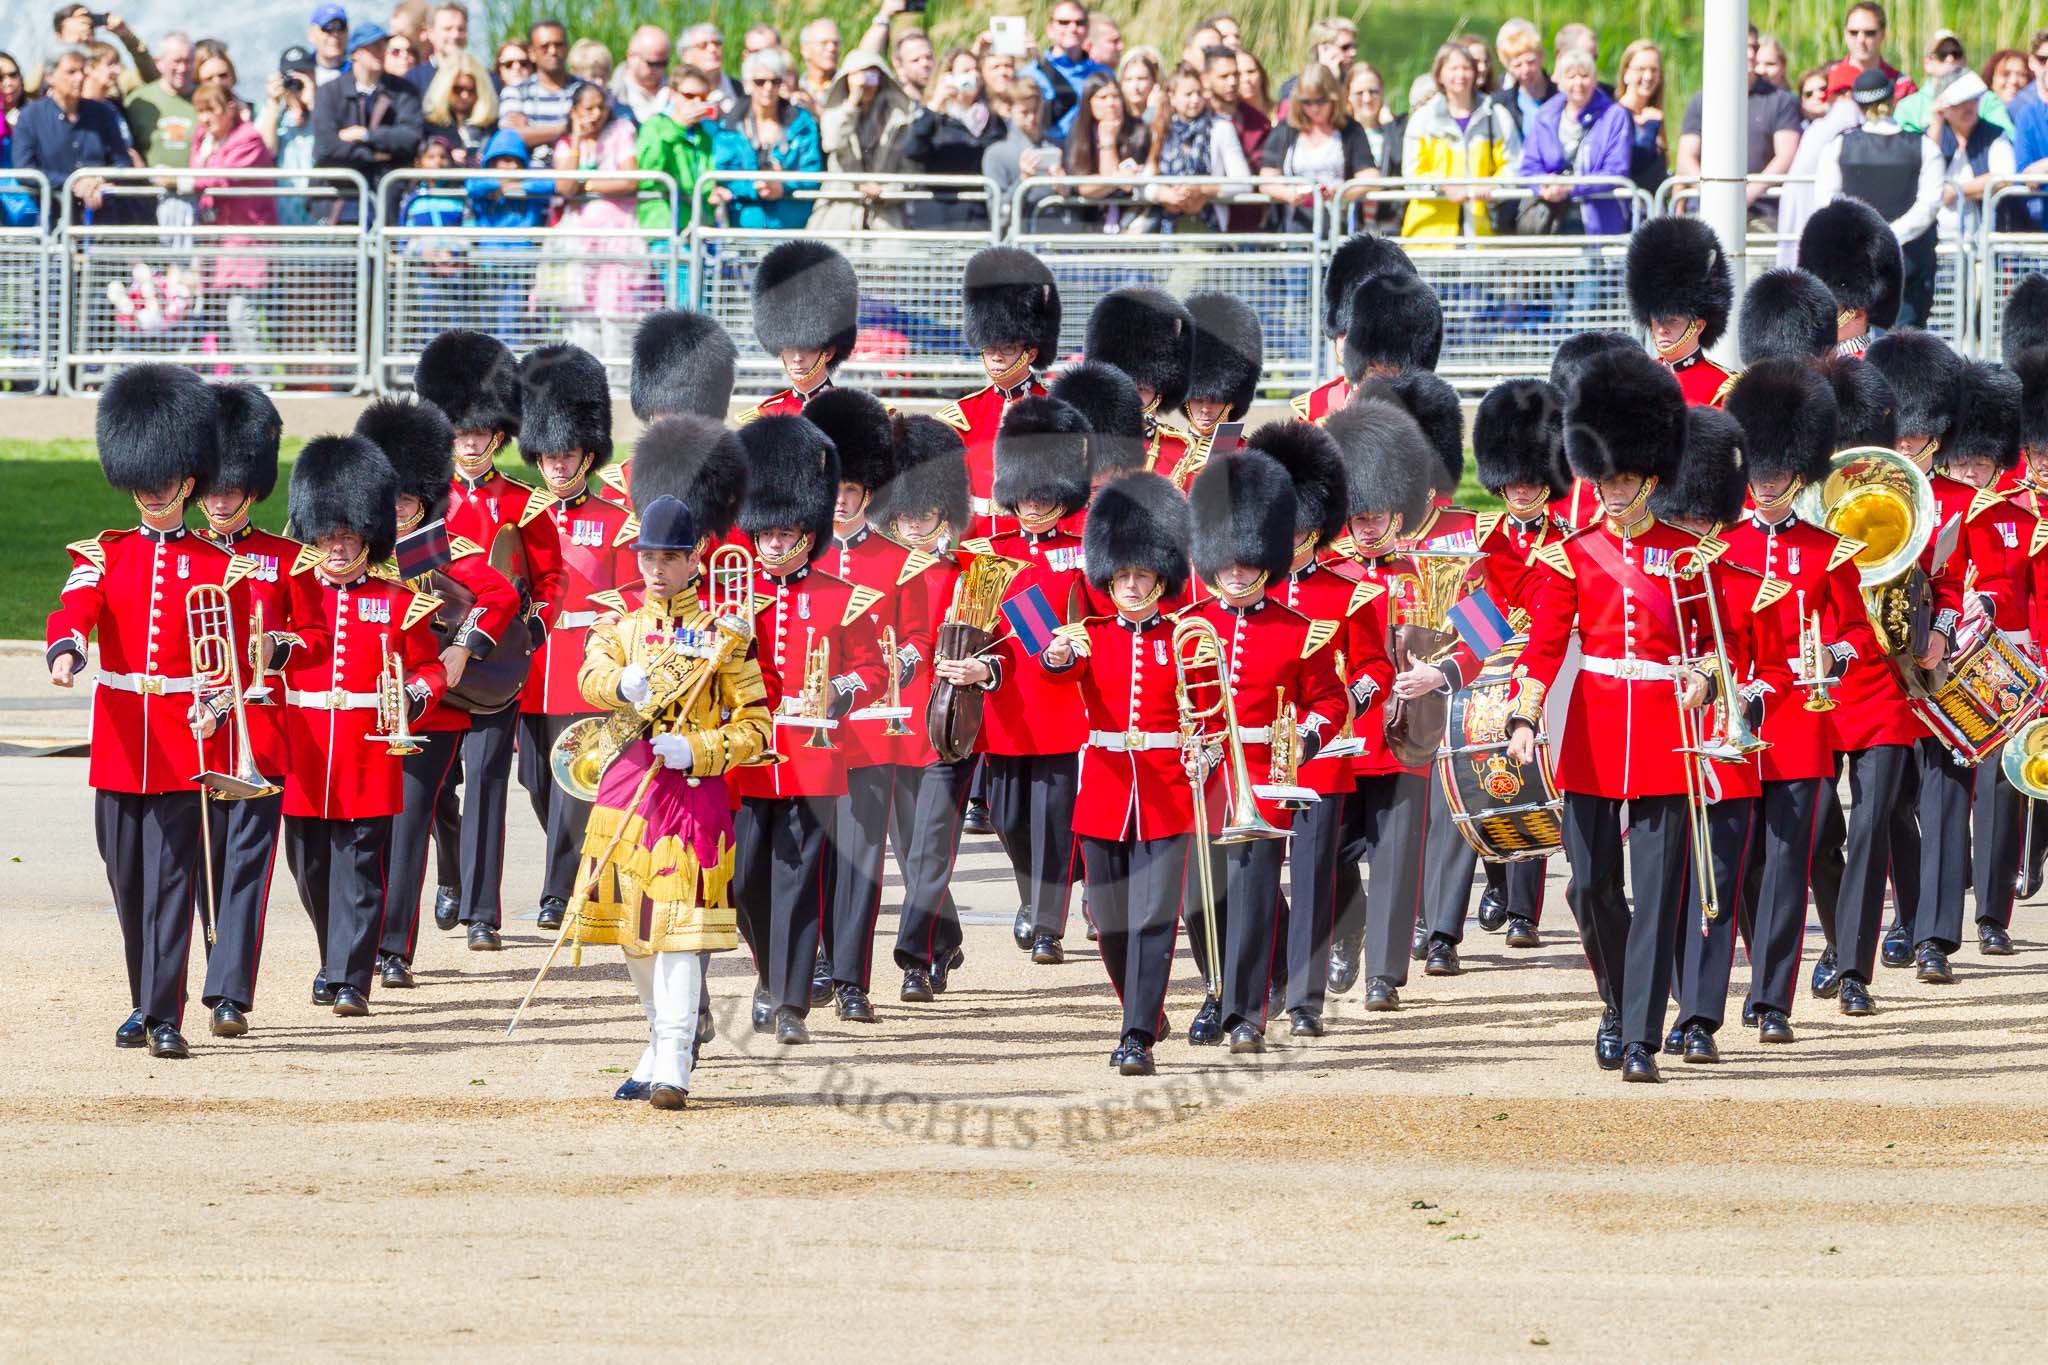 The Colonel's Review 2015.
Horse Guards Parade, Westminster,
London,

United Kingdom,
on 06 June 2015 at 10:28, image #74